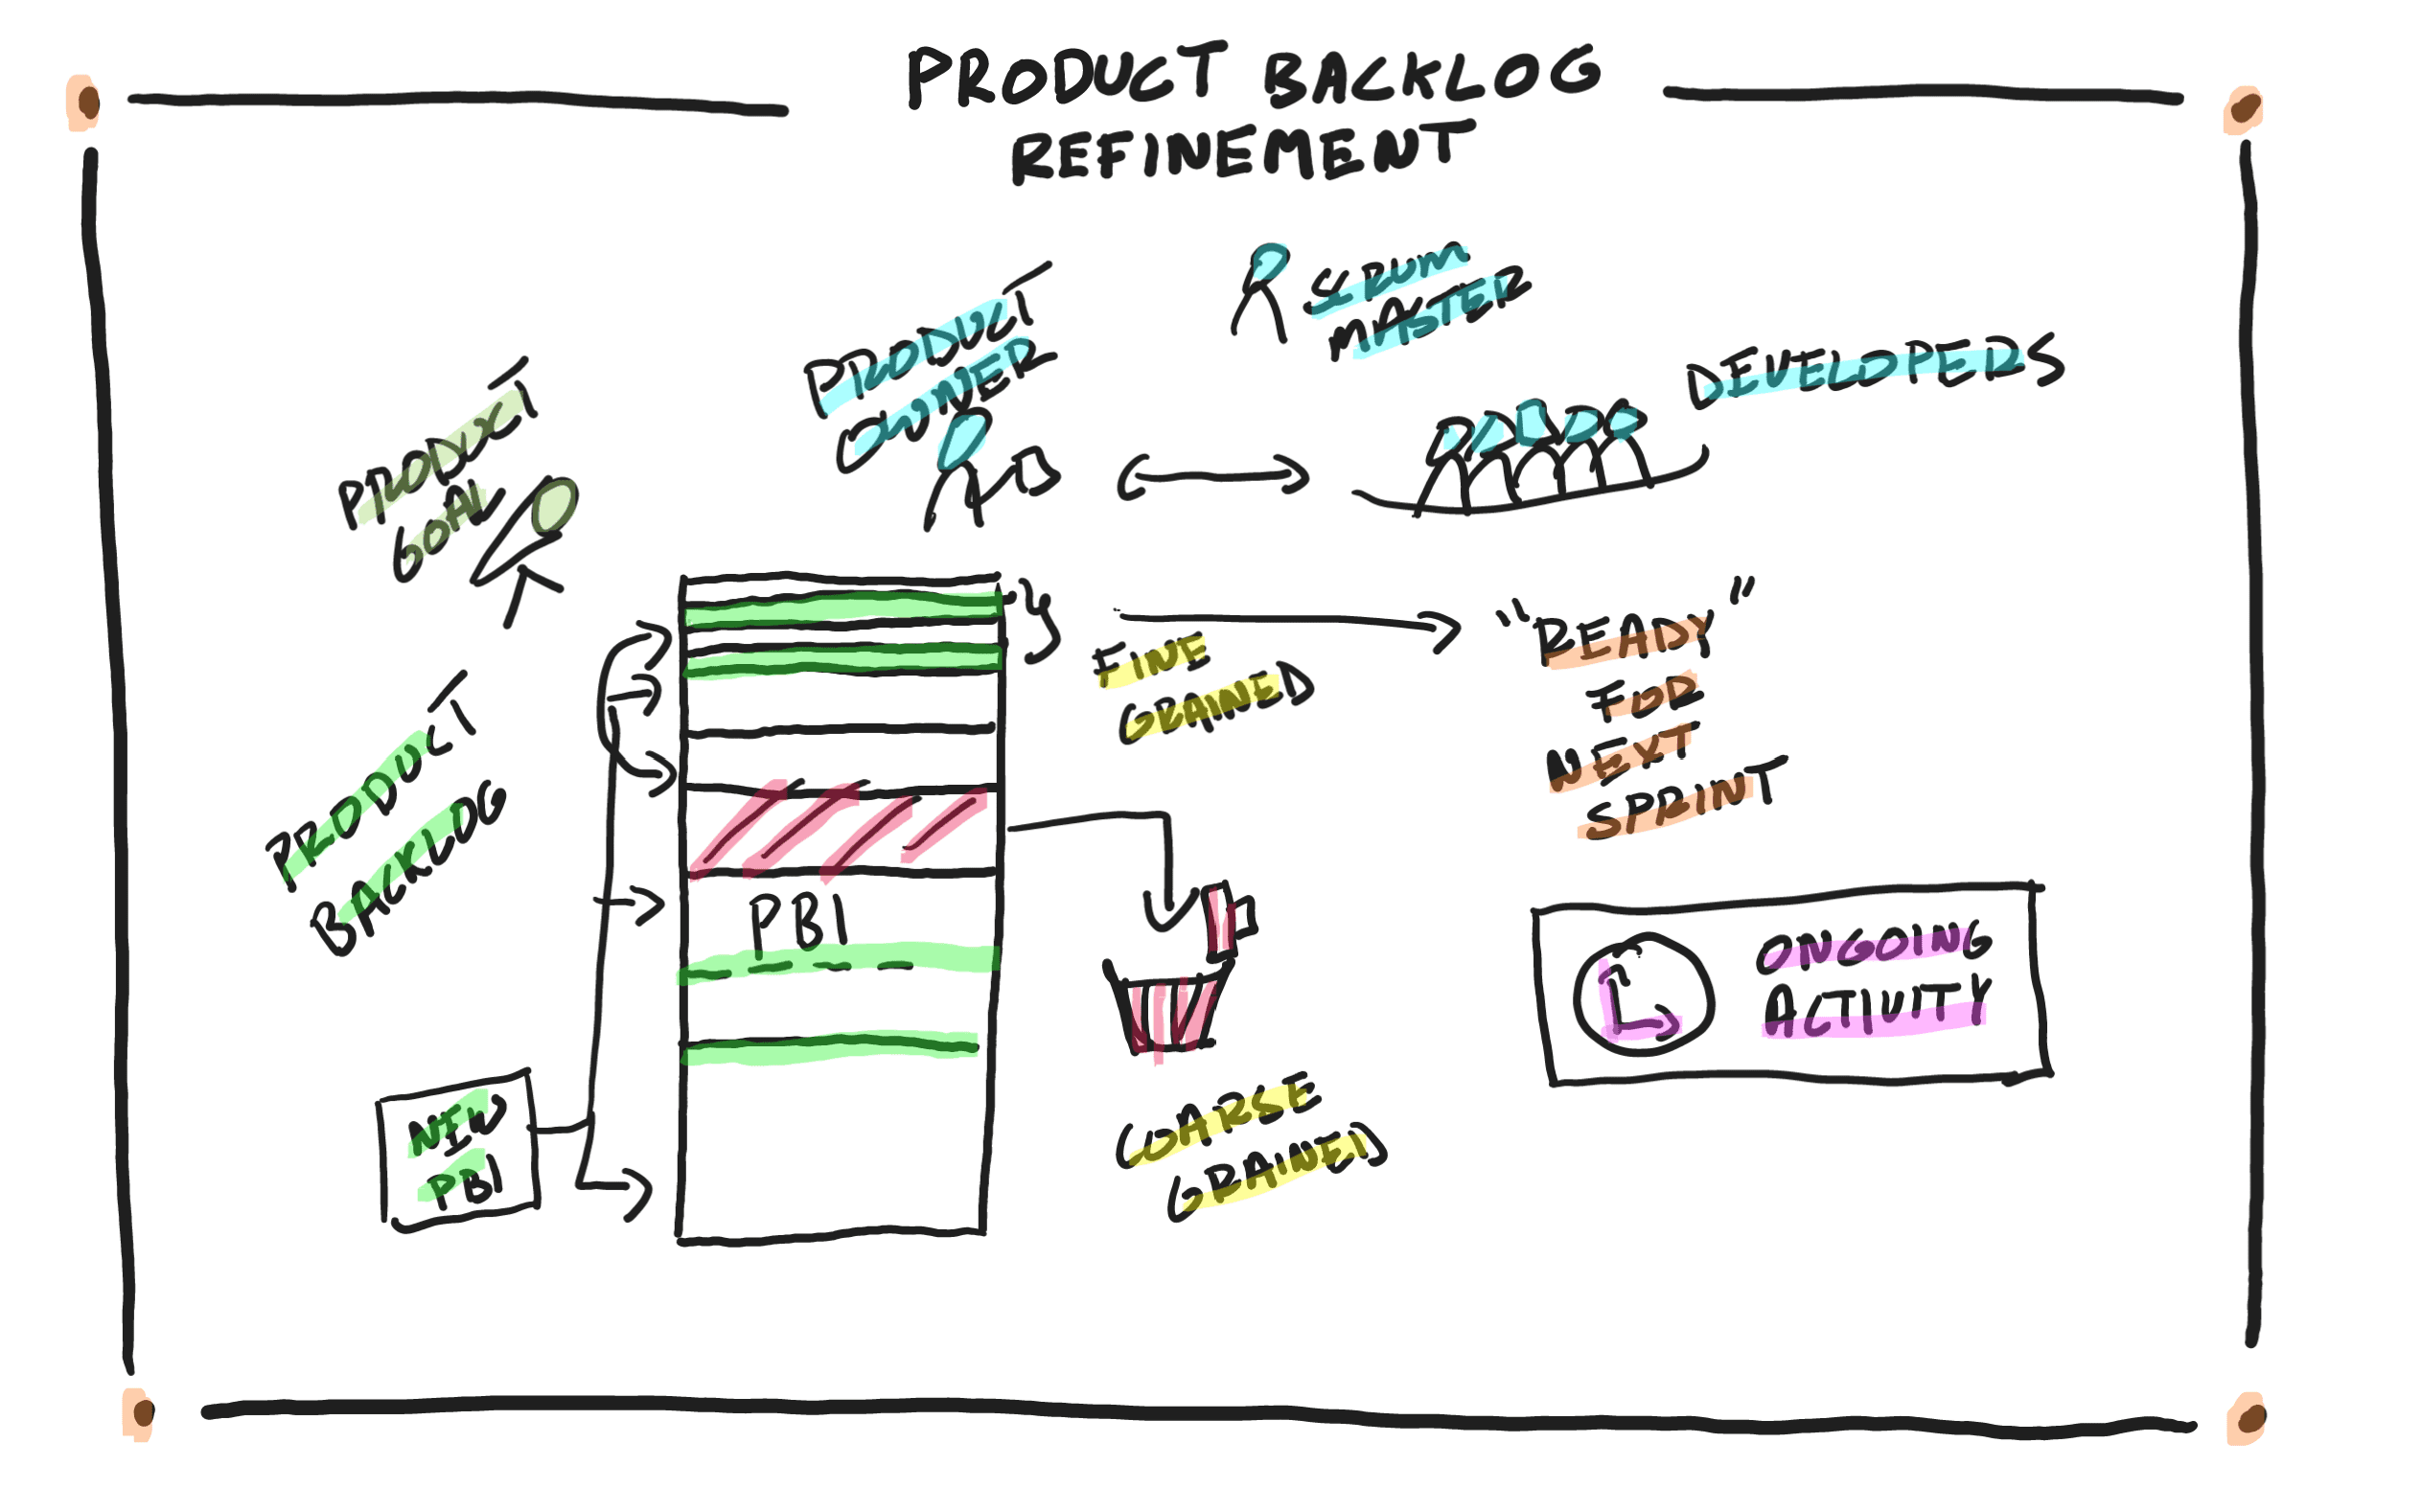 Product Backlog Refinement in a Nutshell